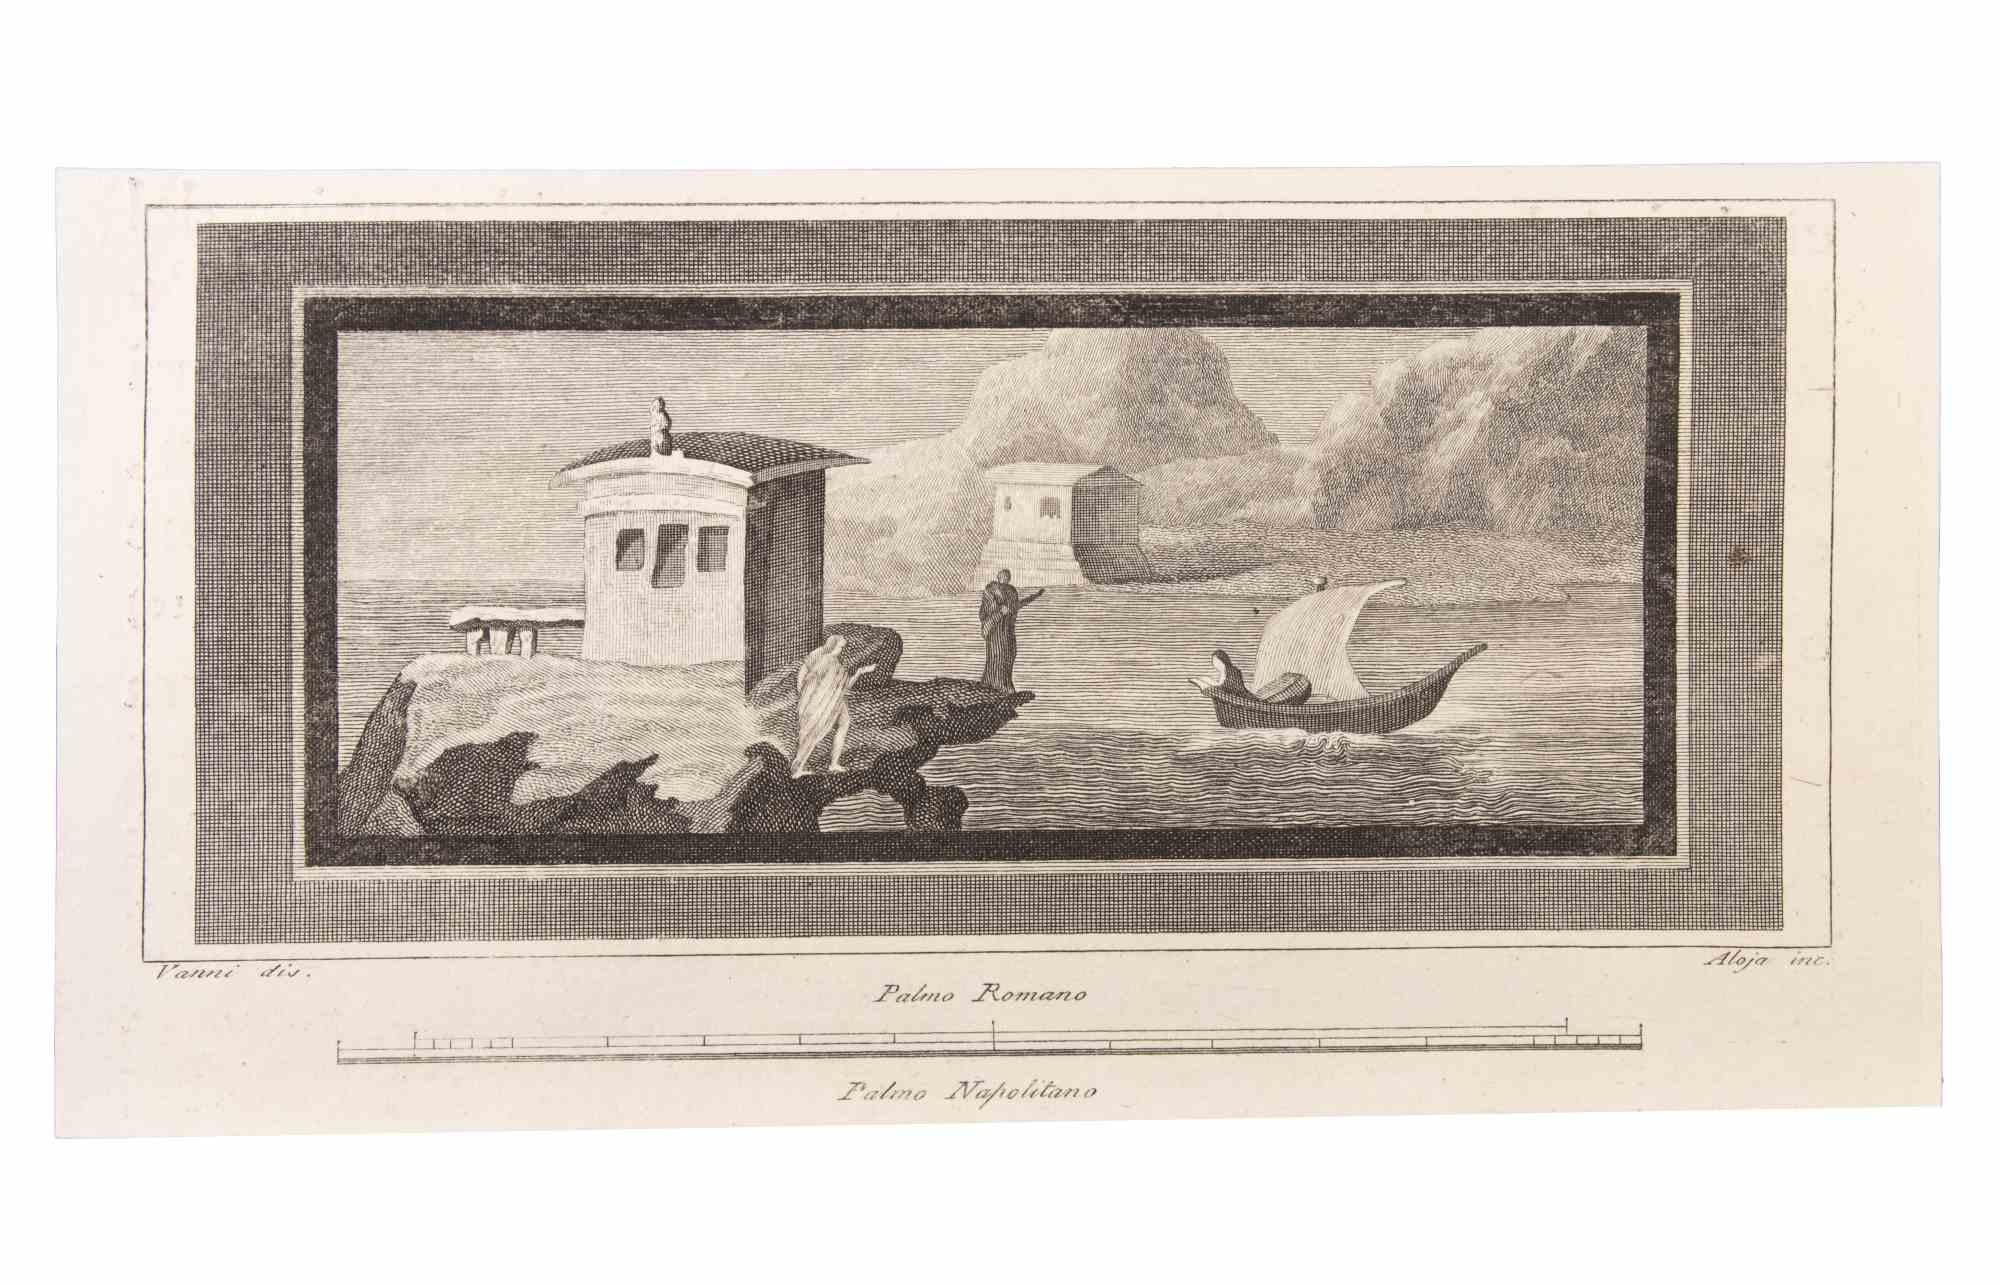 Seascape  is an Etching realized by  Vincenzo Aloja (1768-1817).

The etching belongs to the print suite “Antiquities of Herculaneum Exposed” (original title: “Le Antichità di Ercolano Esposte”), an eight-volume volume of engravings of the finds